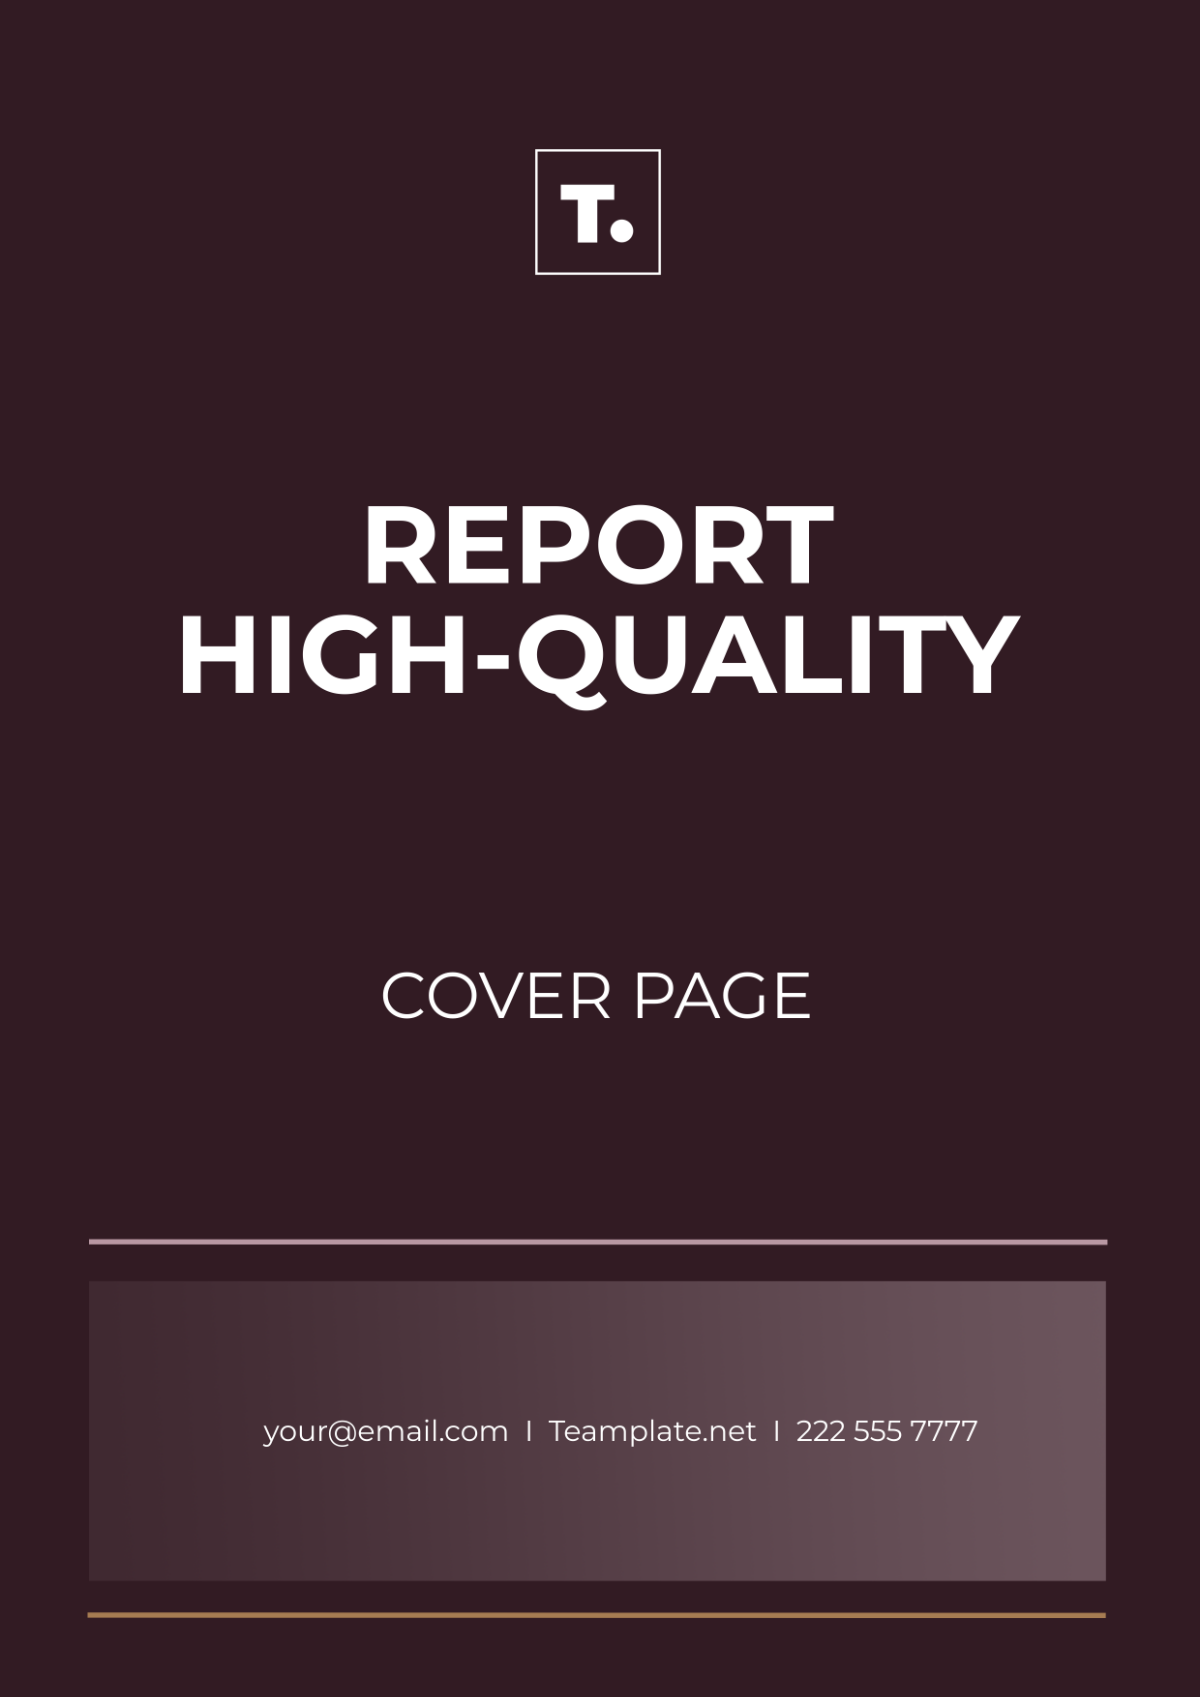 Report High-quality Cover Page Template